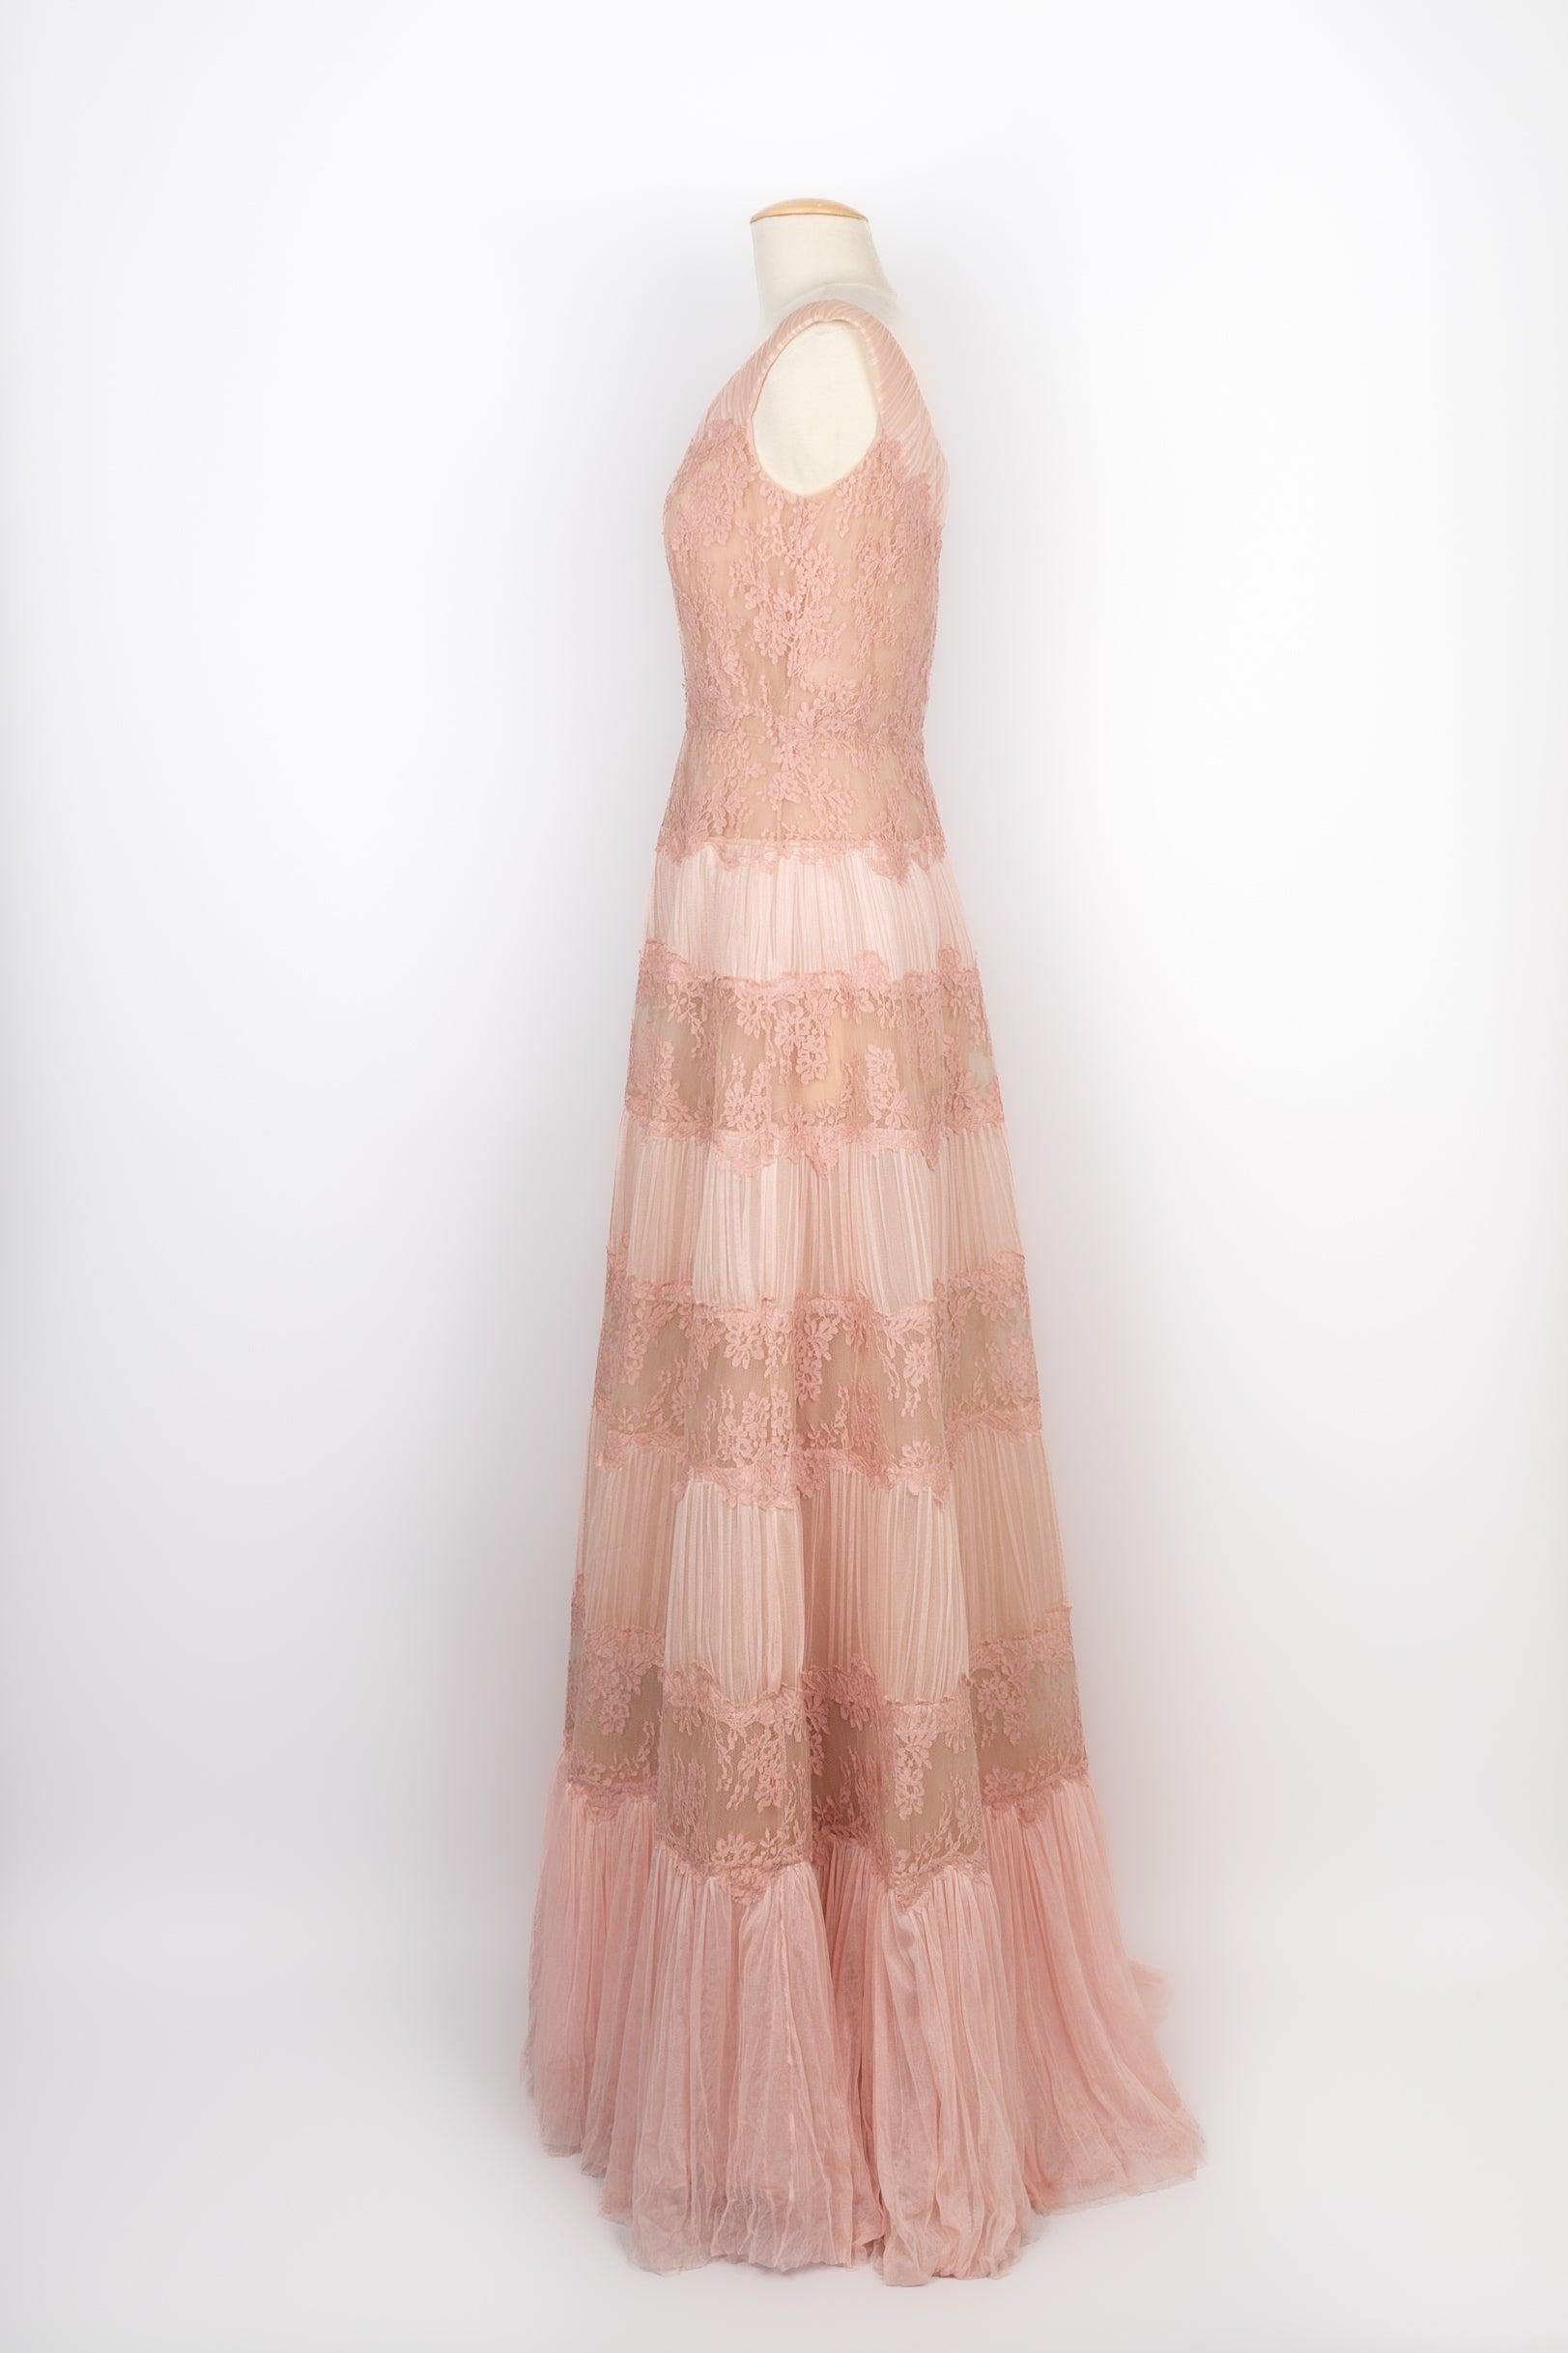 Valentino - (Made in Italy) Long pink lace and silk dress. 42IT size indicated.

Additional information: 
Condition: Very good condition
Dimensions: Chest: 47 cm - Waist: 36 cm - Length: 160 cm

Seller Reference: VR131